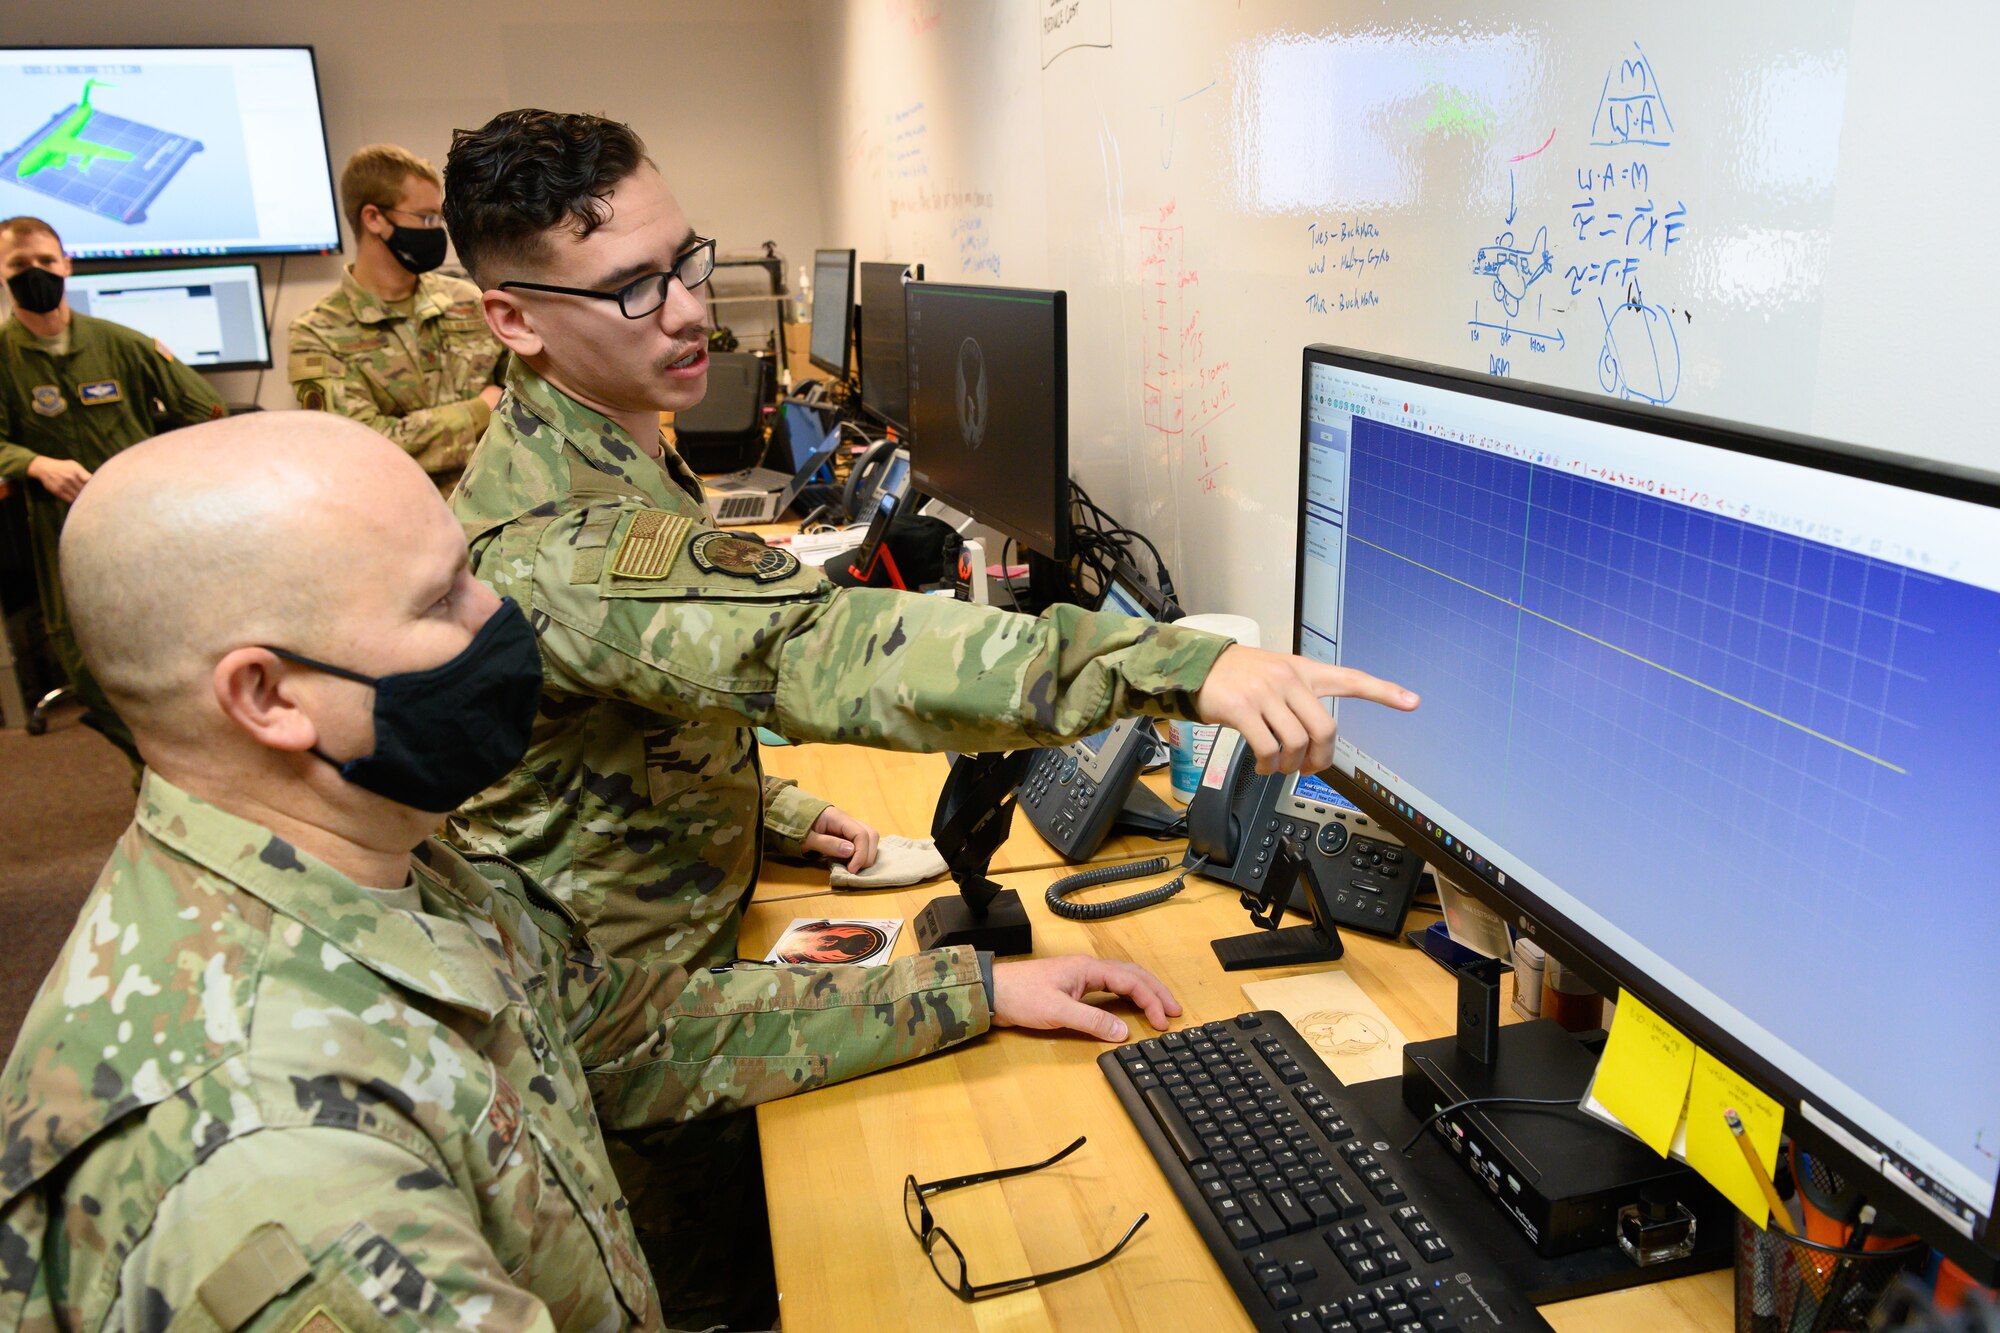 Airman shows software to chief.